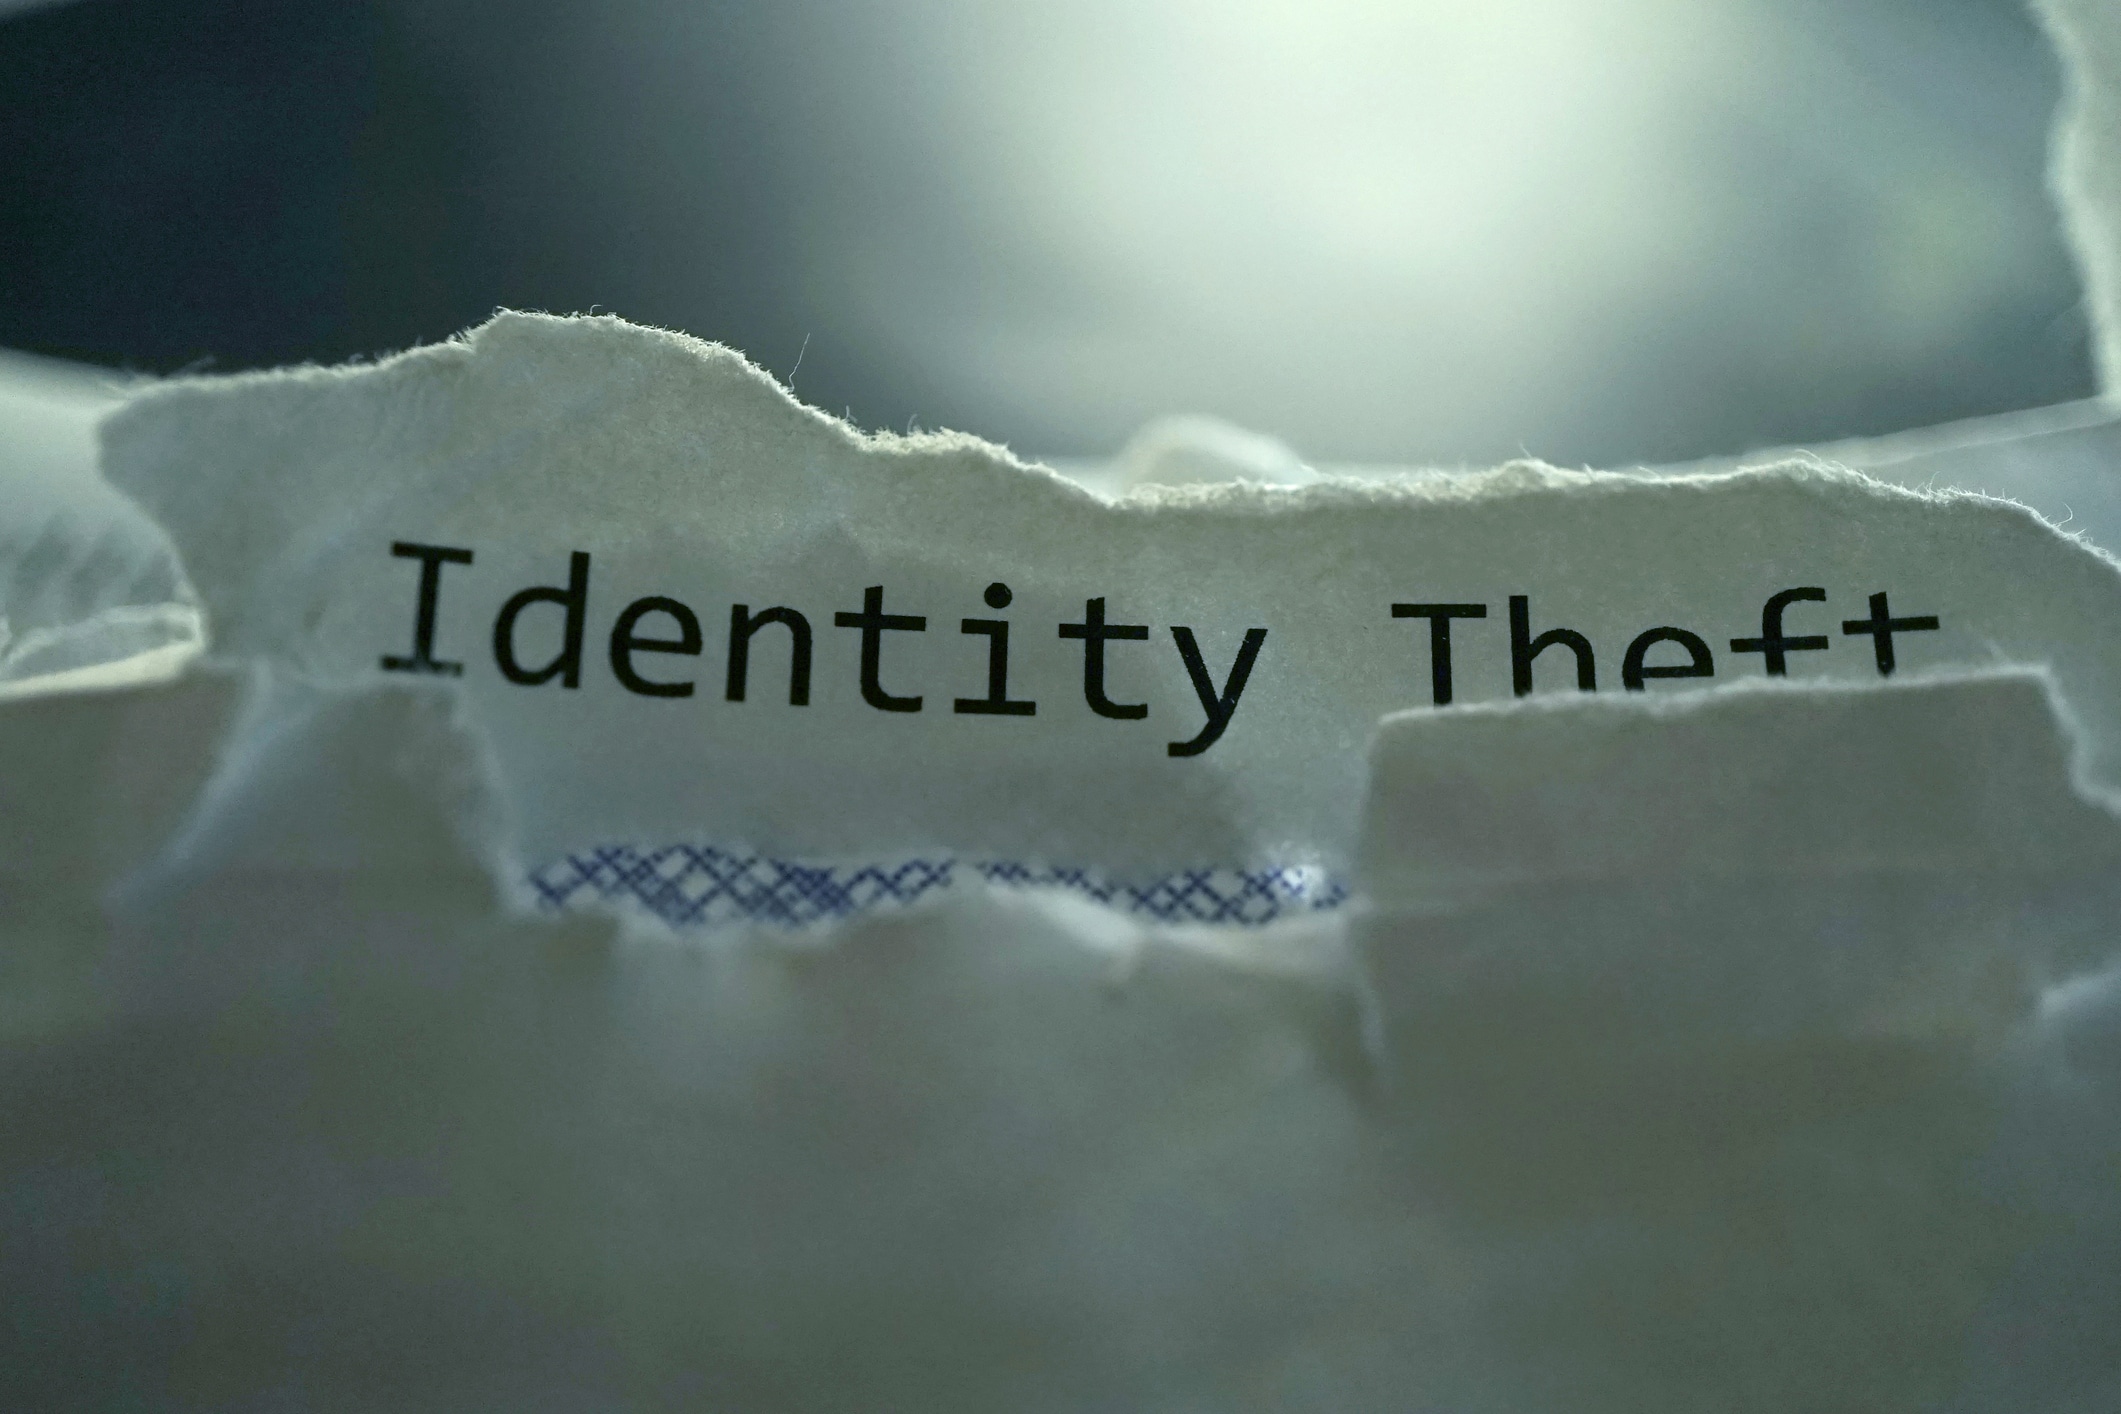 Reduce your risk of identity theft